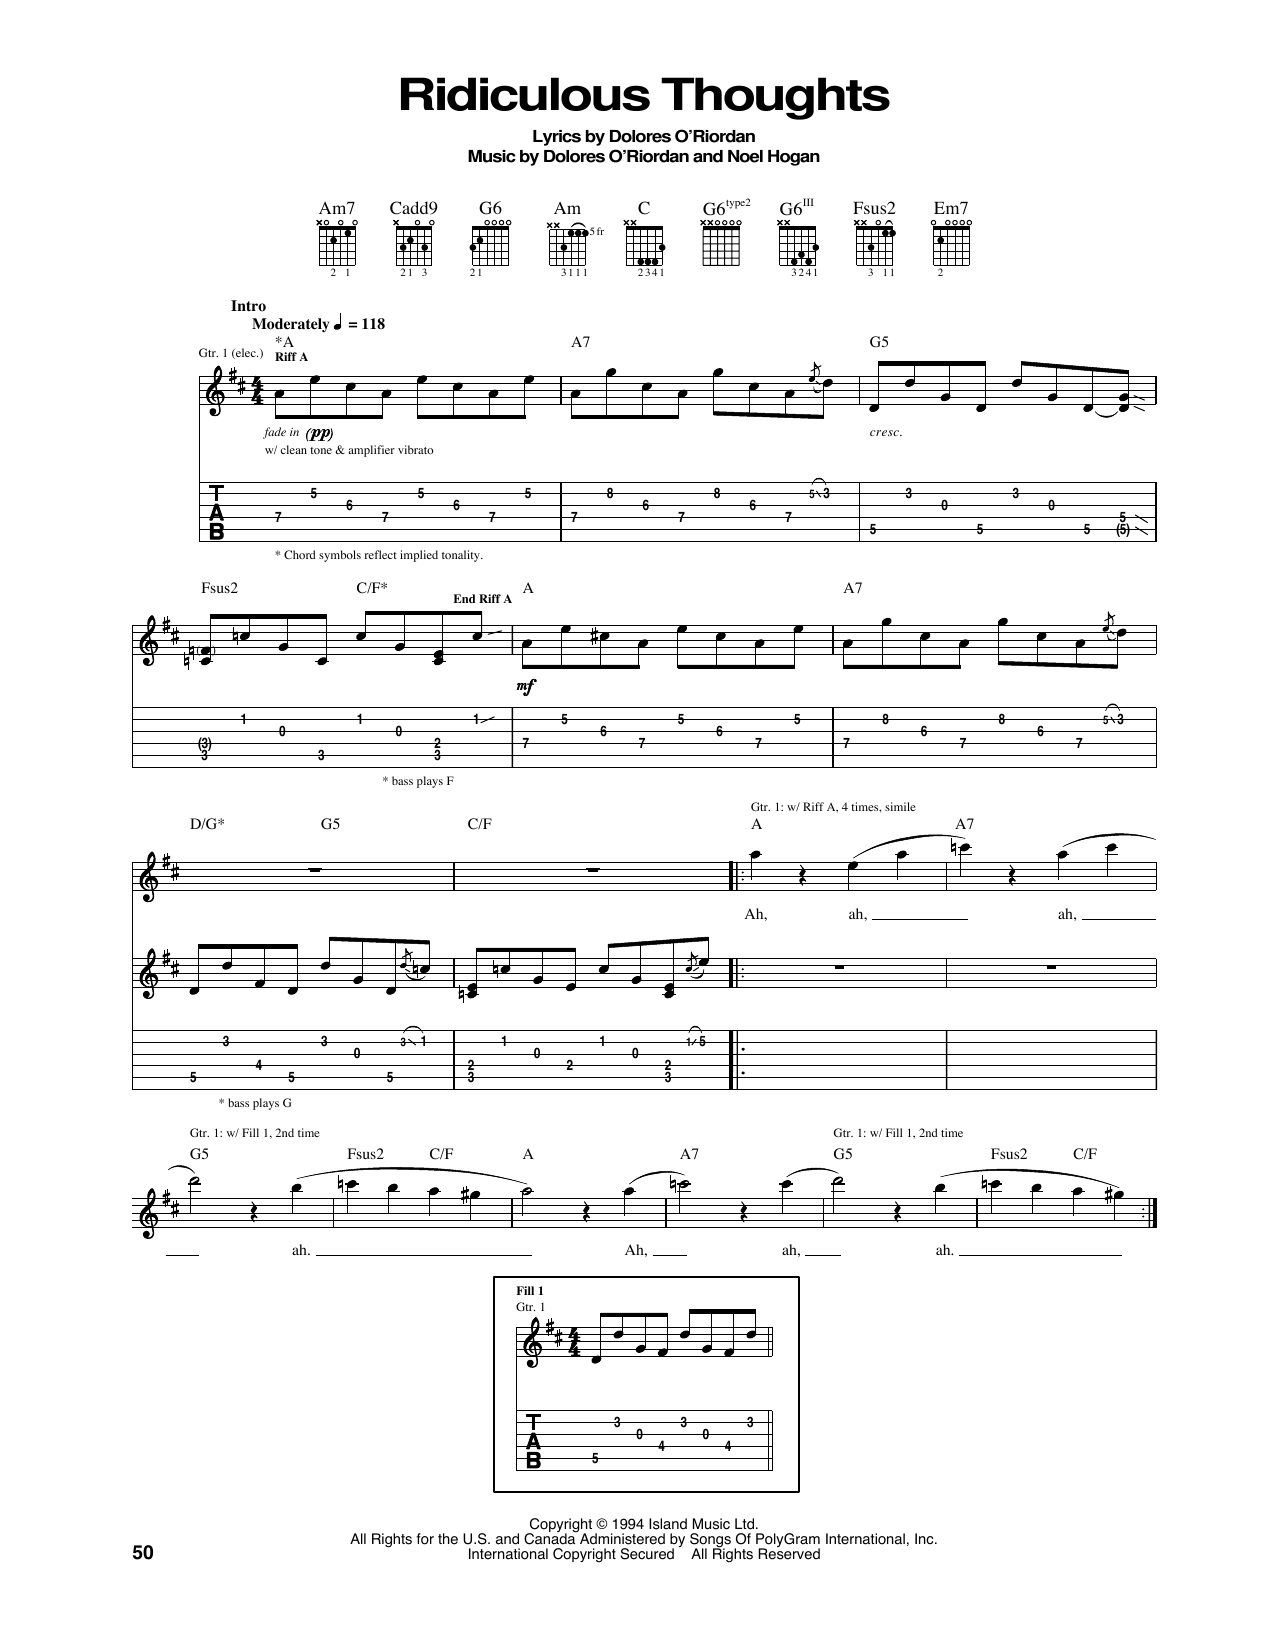 Download The Cranberries Ridiculous Thoughts Sheet Music